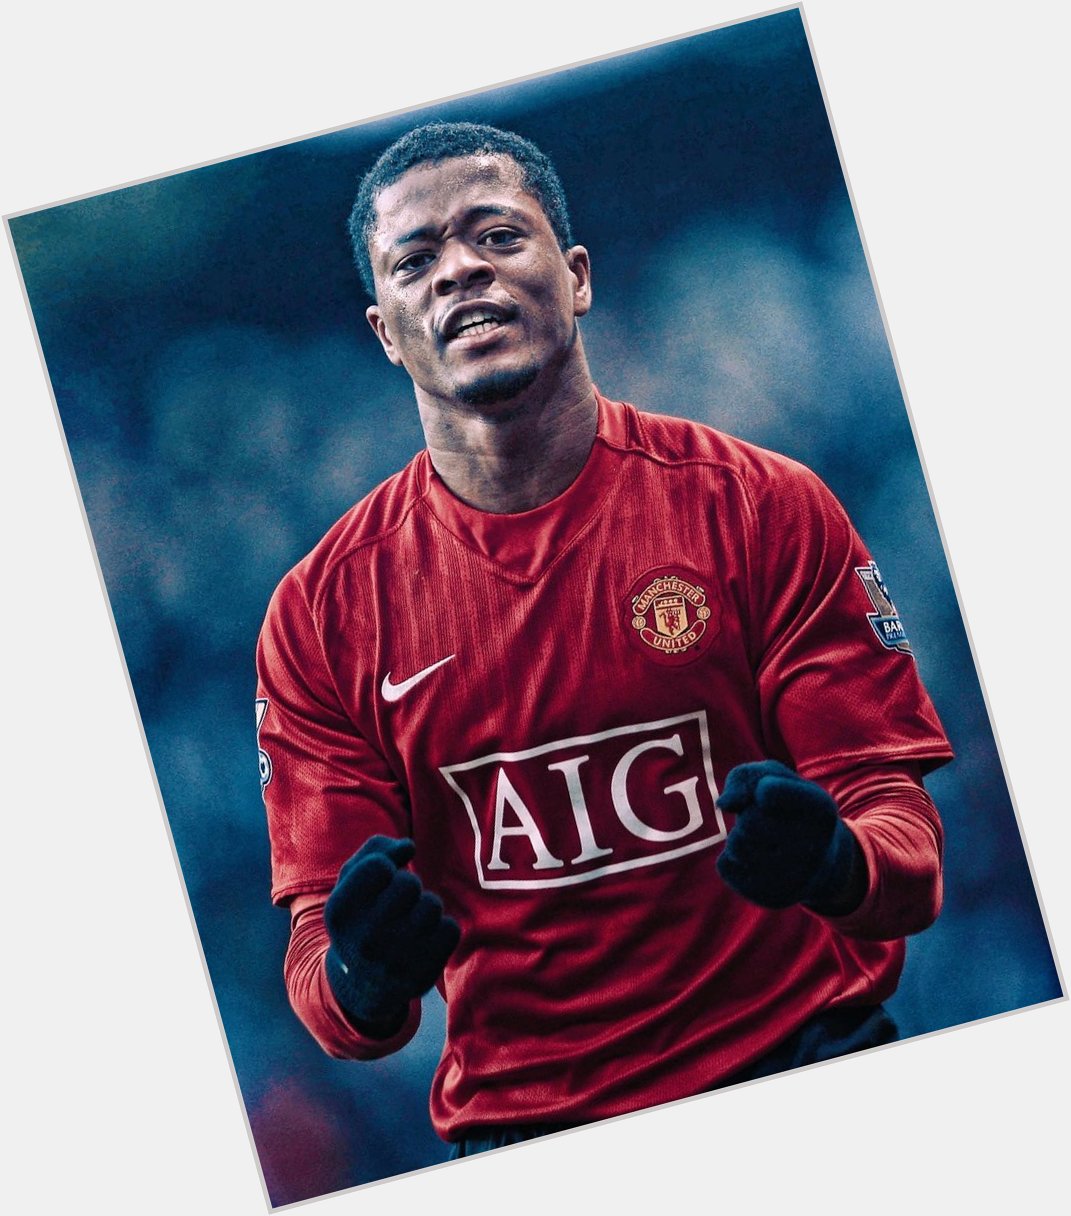 Happy 40th Birthday to Manchester United legend, Patrice Evra

I love this game! 